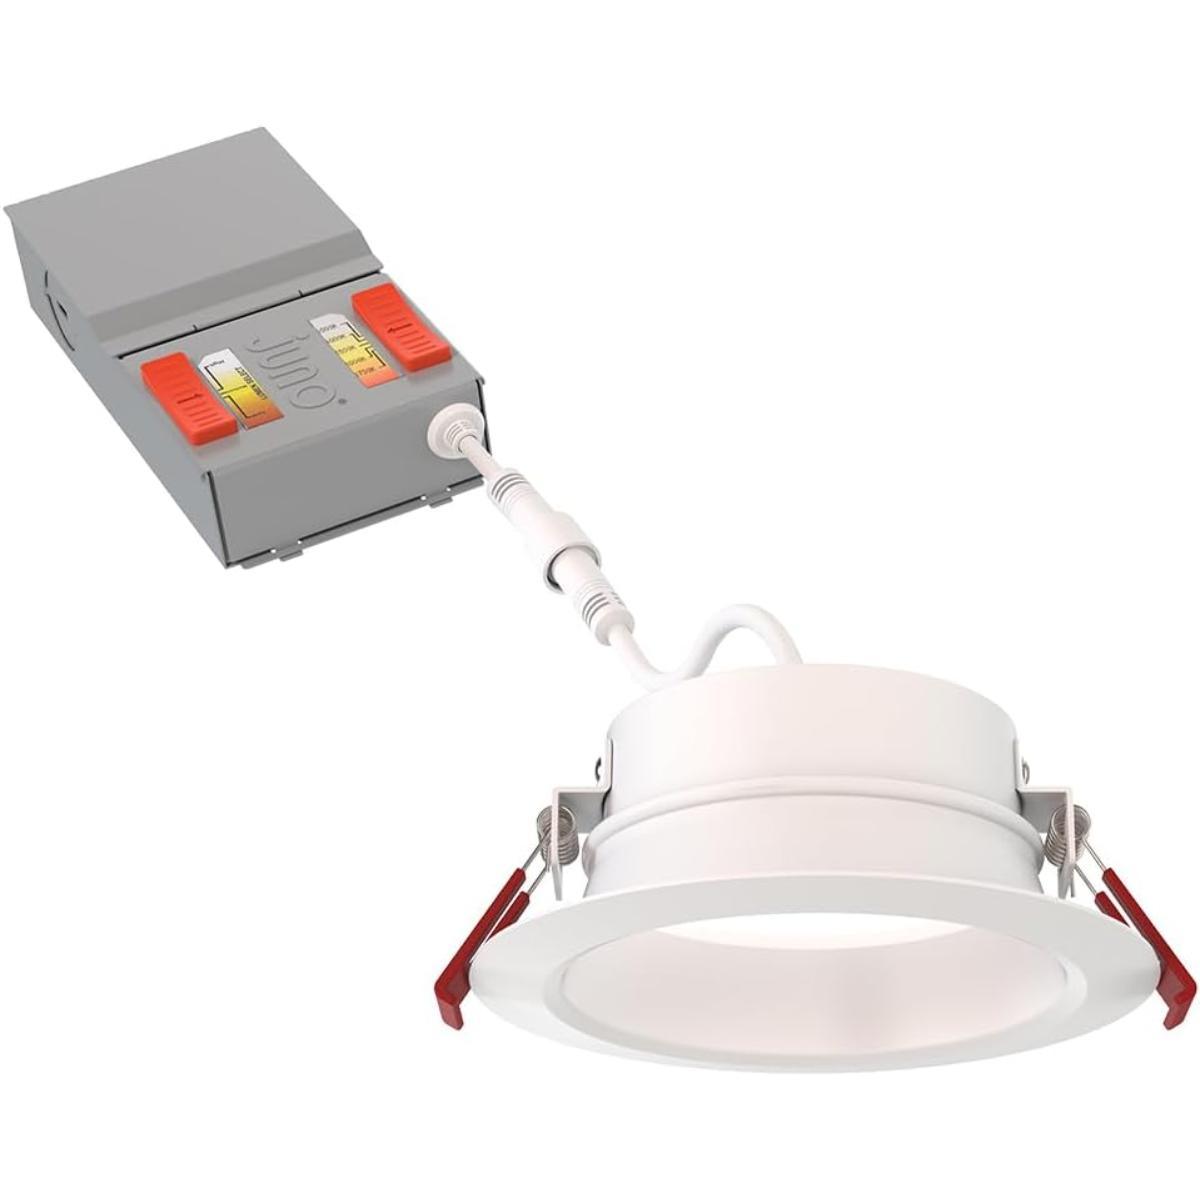 4 inch Deep Regress LED Canless Wafer Downlight, 15W, Adjustable 700/900/1100 Lumens, Selectable CCT, 2700K to 5000K, Smooth Trim - Bees Lighting